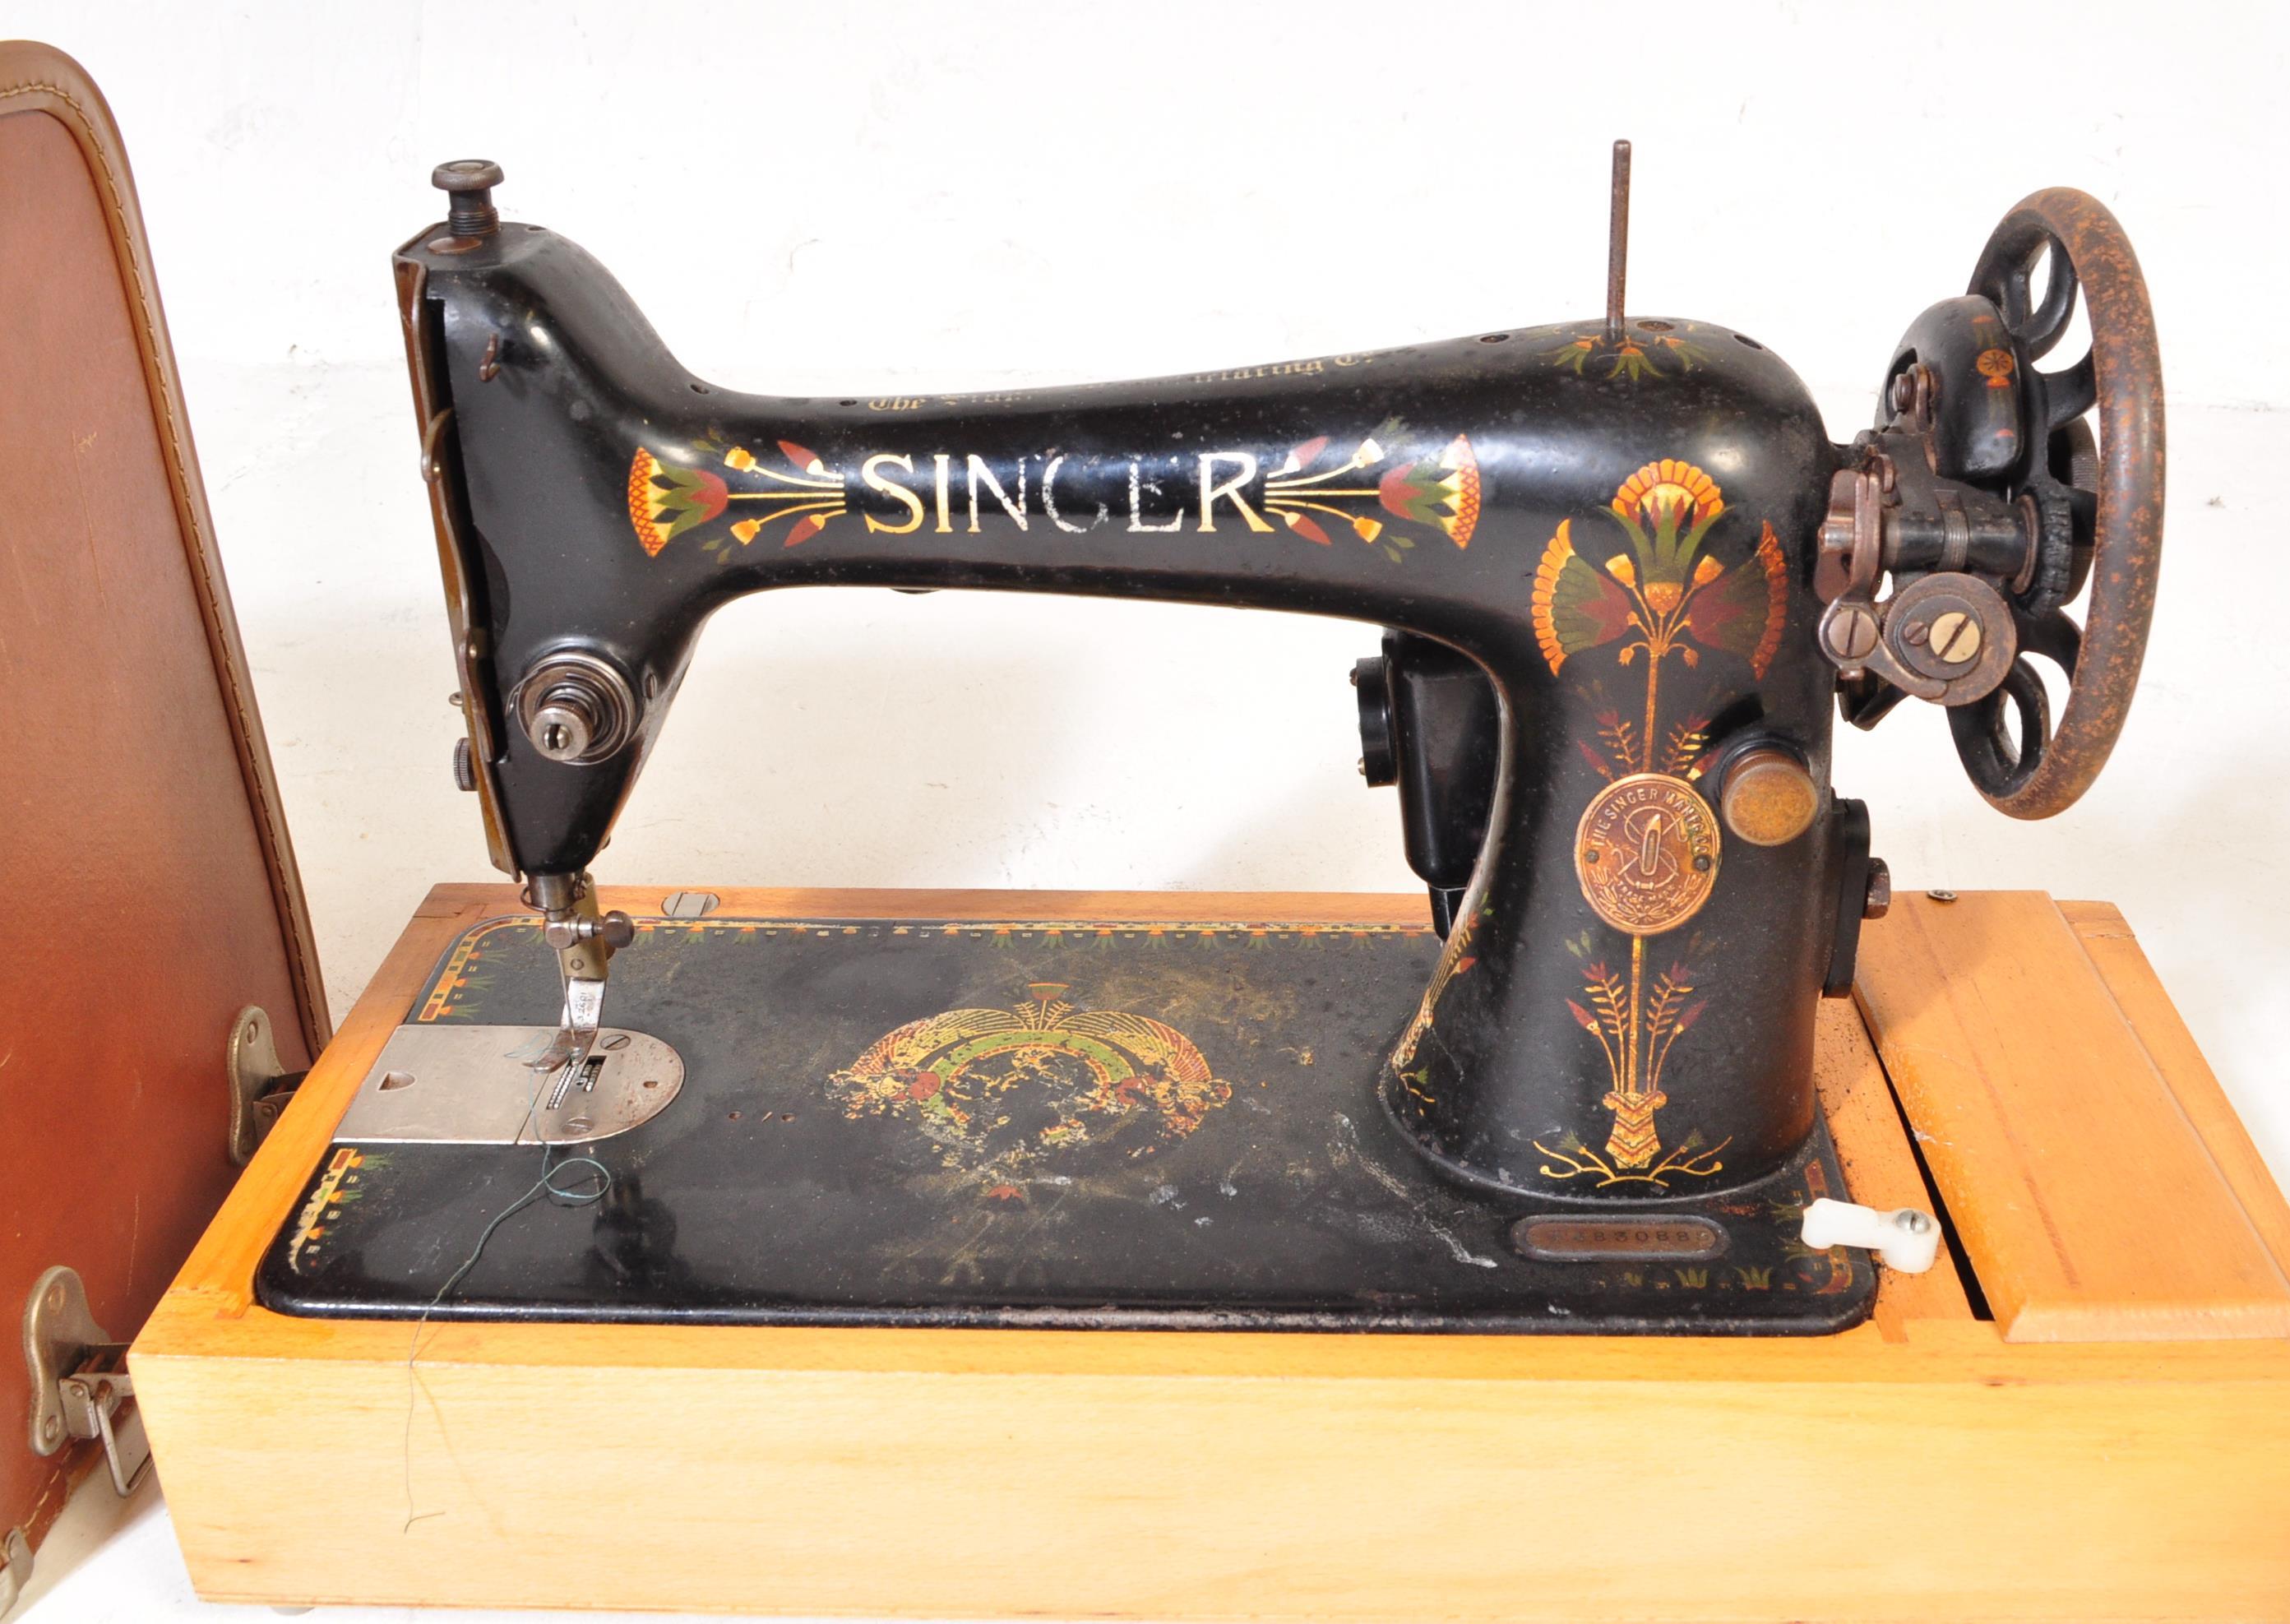 SINGER SEWING MACHINE - EARLY 20TH CENTURY - LEATHER CASE - Image 3 of 6